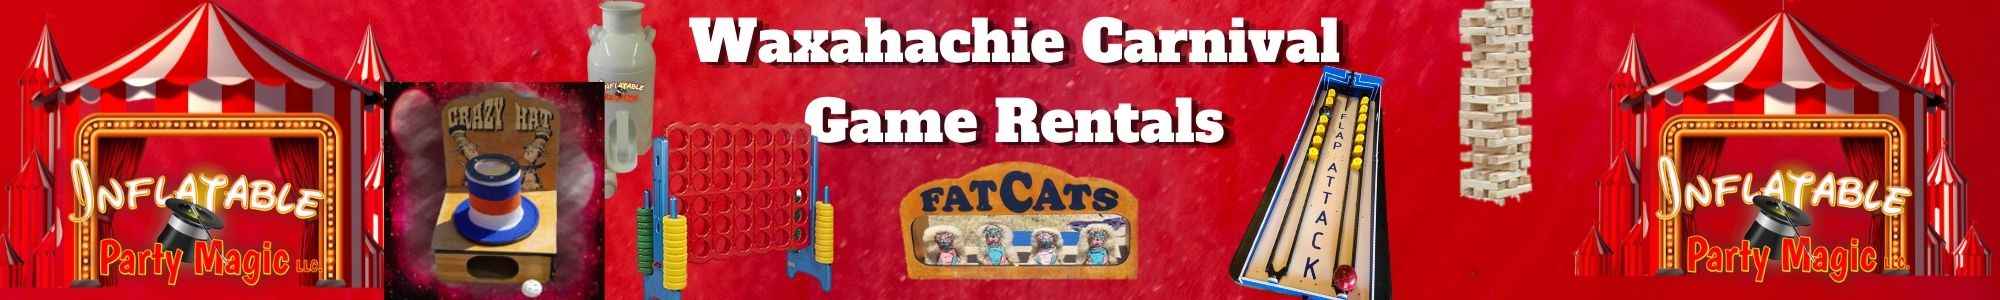 Waxahachie Carnival Game and Giant Backyard Game Rentals